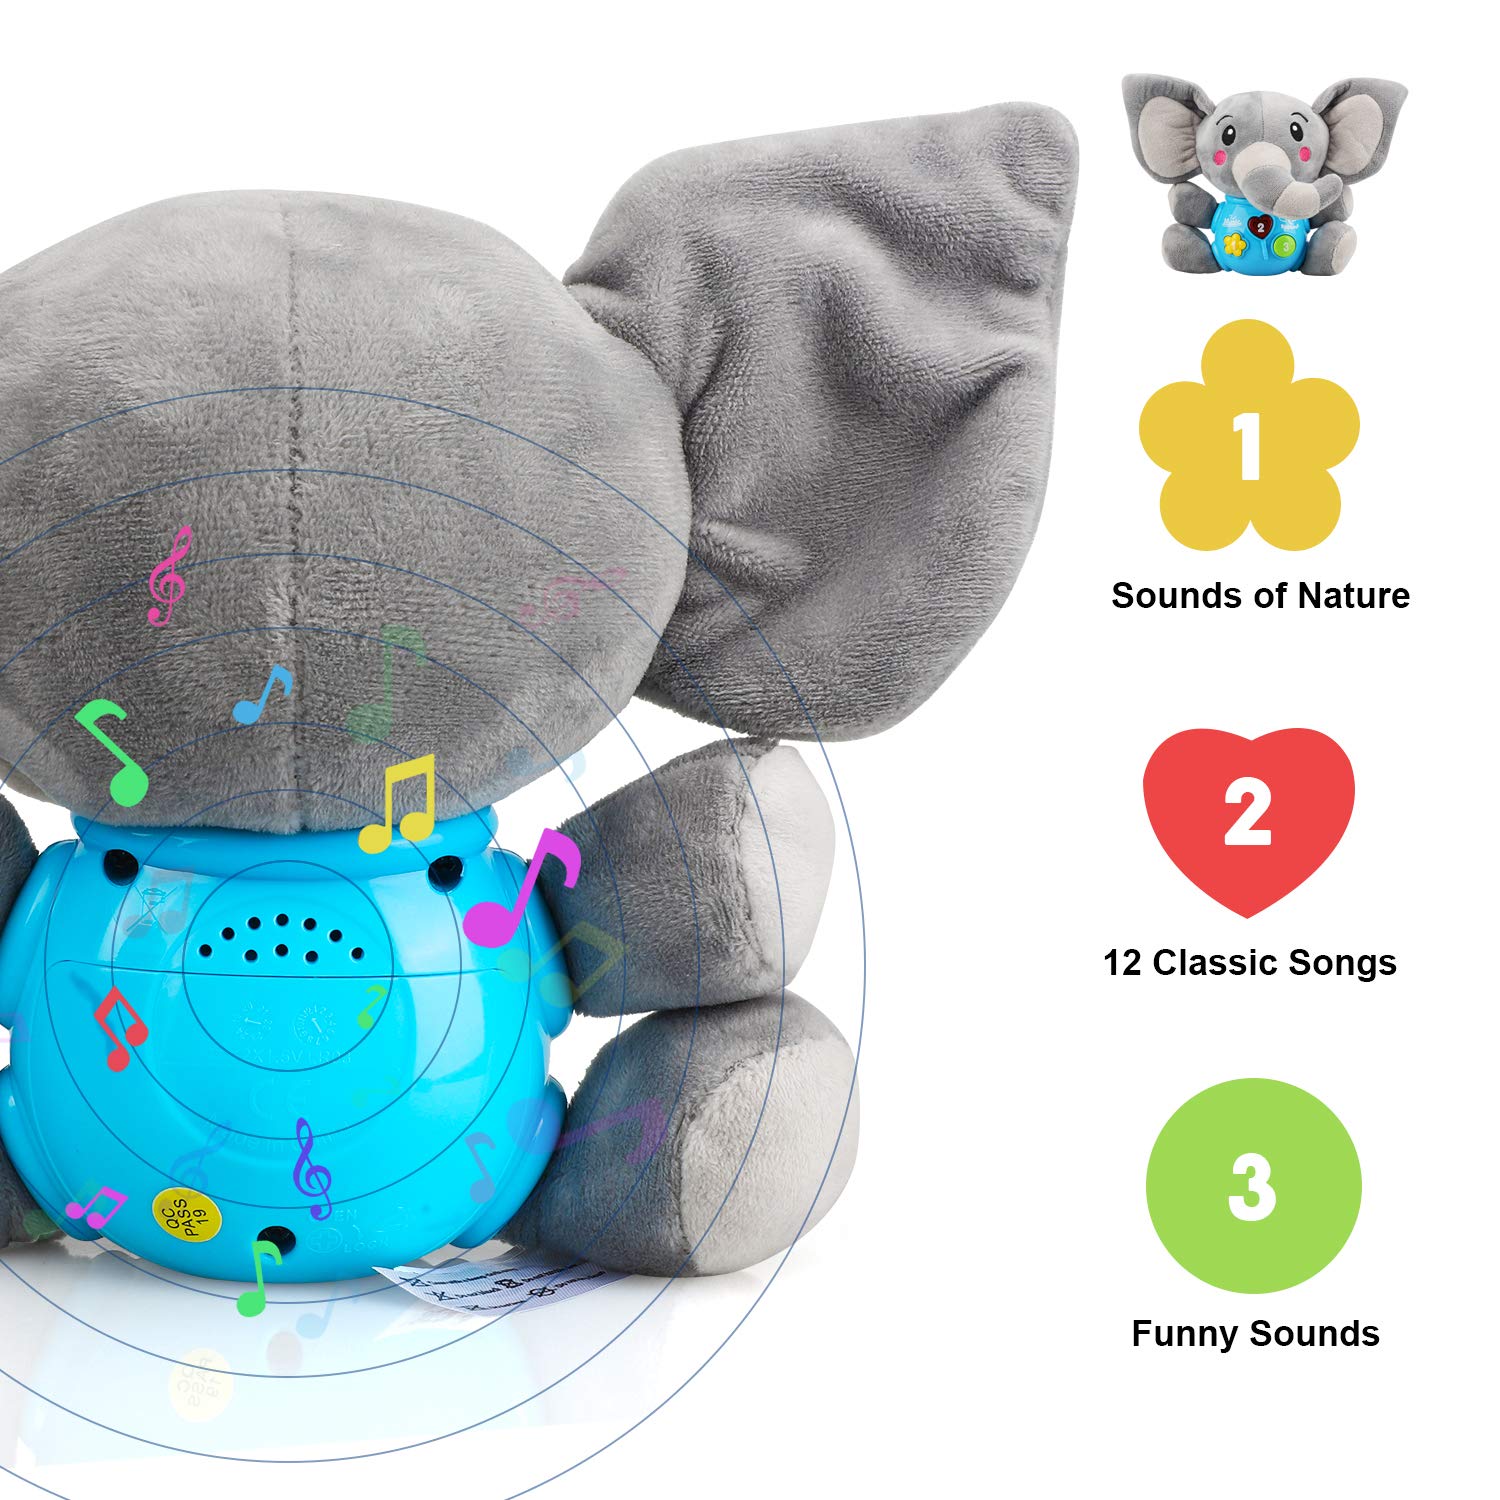 STEAM Life Plush Elephant Baby Toys - Newborn Baby Musical Toys for Baby 0 to 36 Months - Light Up Baby Toys for Infants Babies Boys Girls Toddlers Baby Gifts 0 3 6 9 12 Month